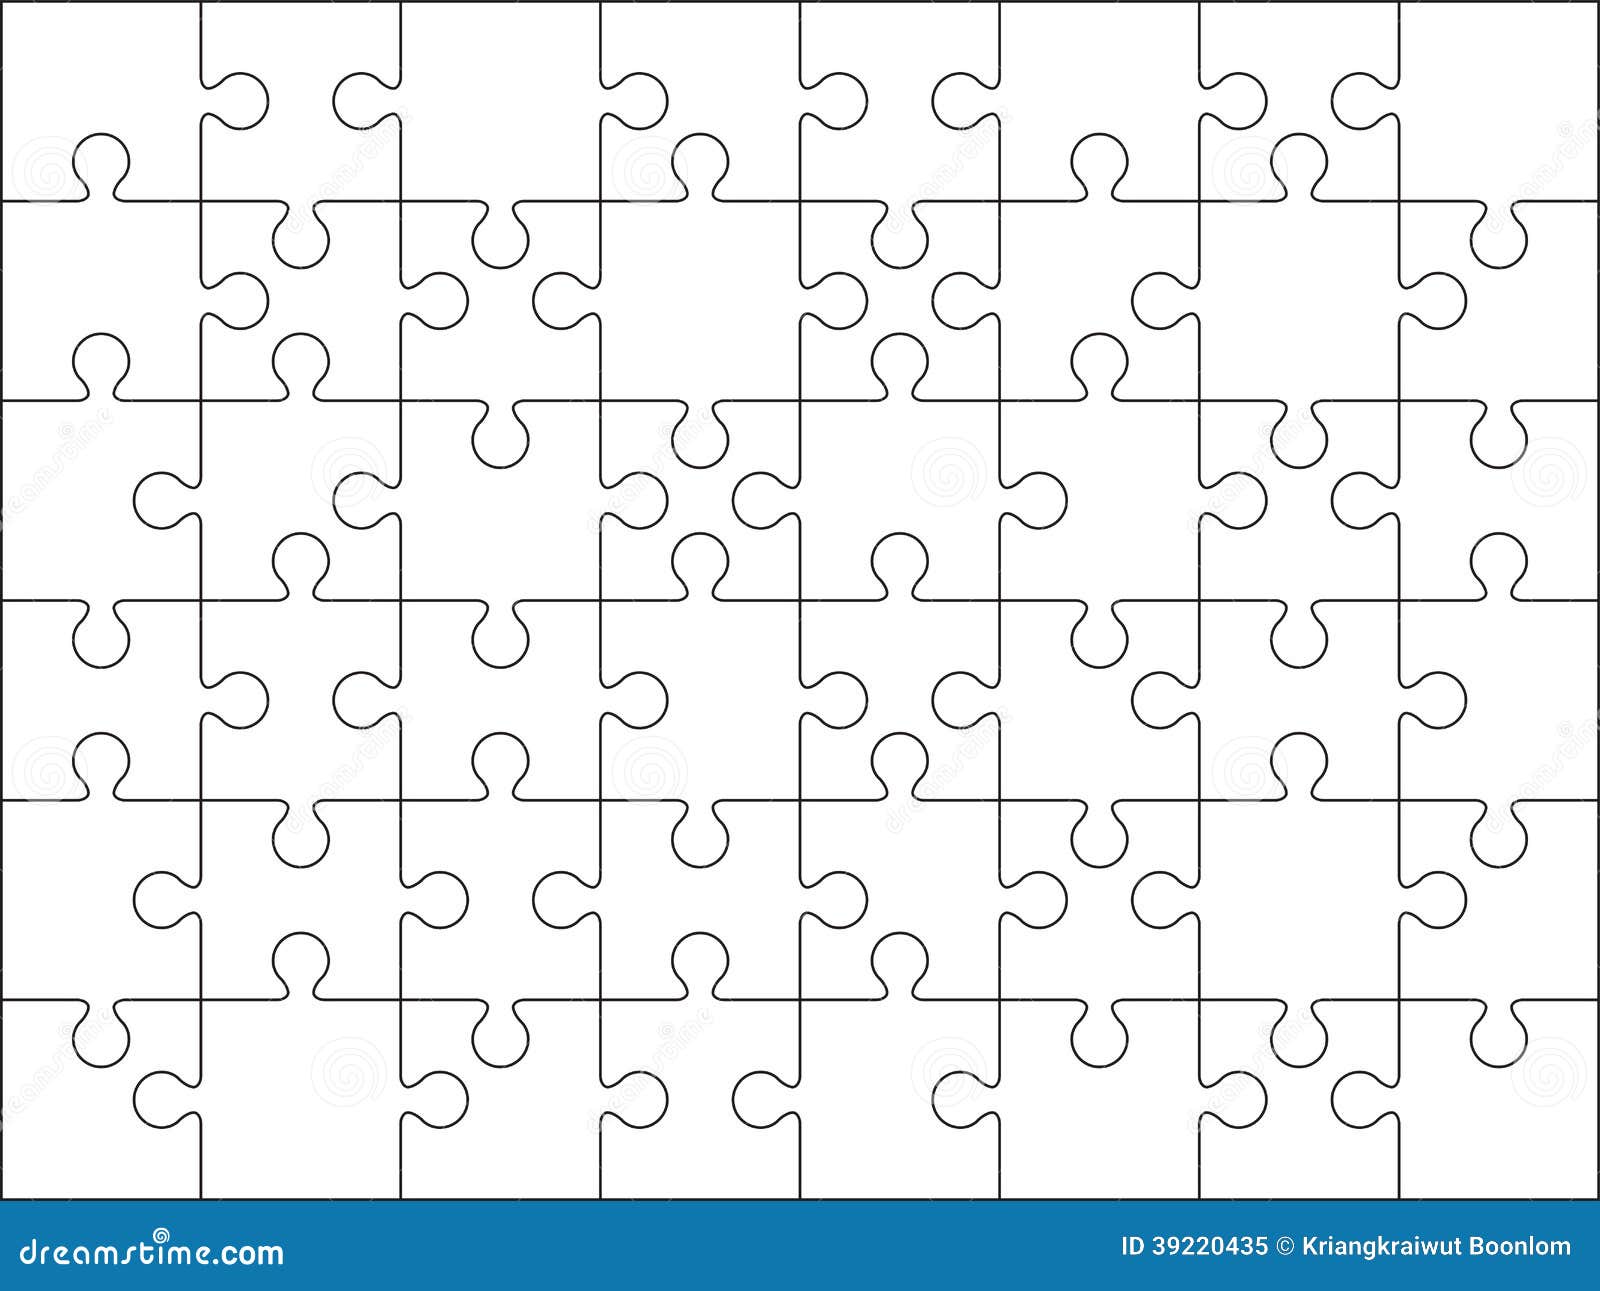 48 Jigsaw Puzzle Blank Template Stock Illustration Illustration Of Isolated Connection 39220435